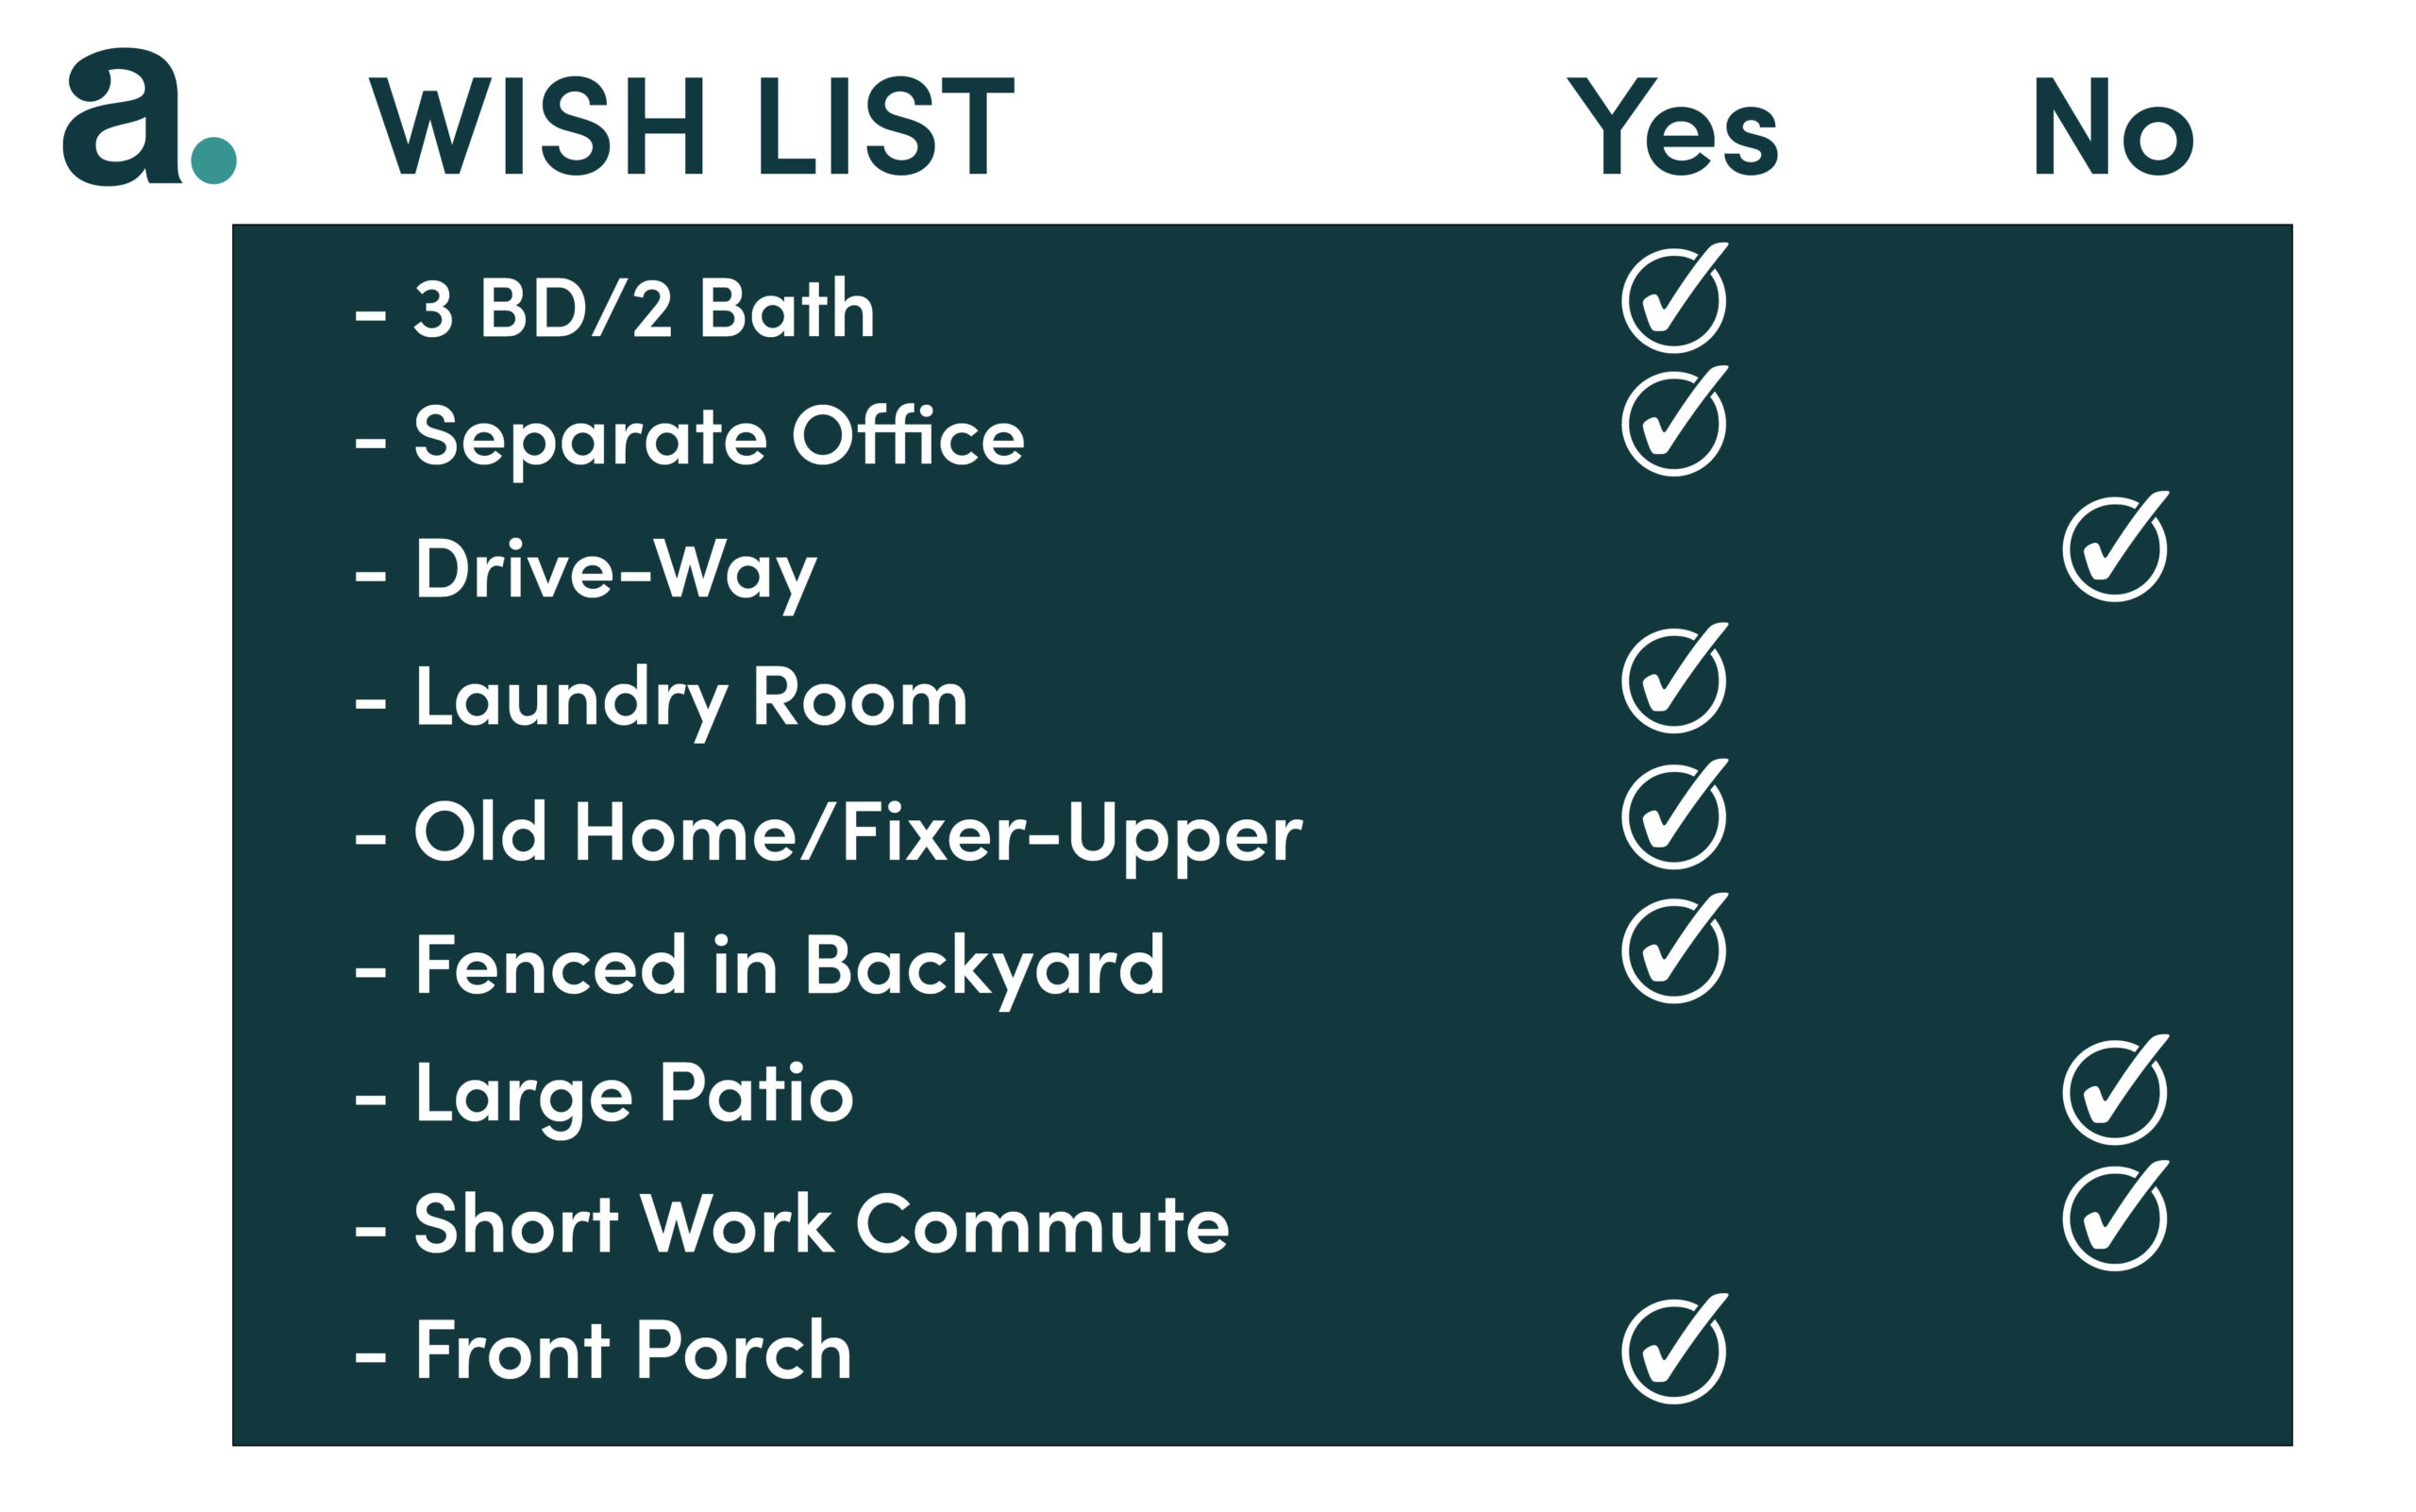 Wish list infographic with the following items: 3 BD/2 Bath (Yes), Separate Office (Yes), Drive-Way (No), Laundry Room (Yes), Old Home/Fixer-Upper (Yes), Fenced in Backyard (Yes), Large Patio (No), Short Work Commute (No), Front Porch (Yes)